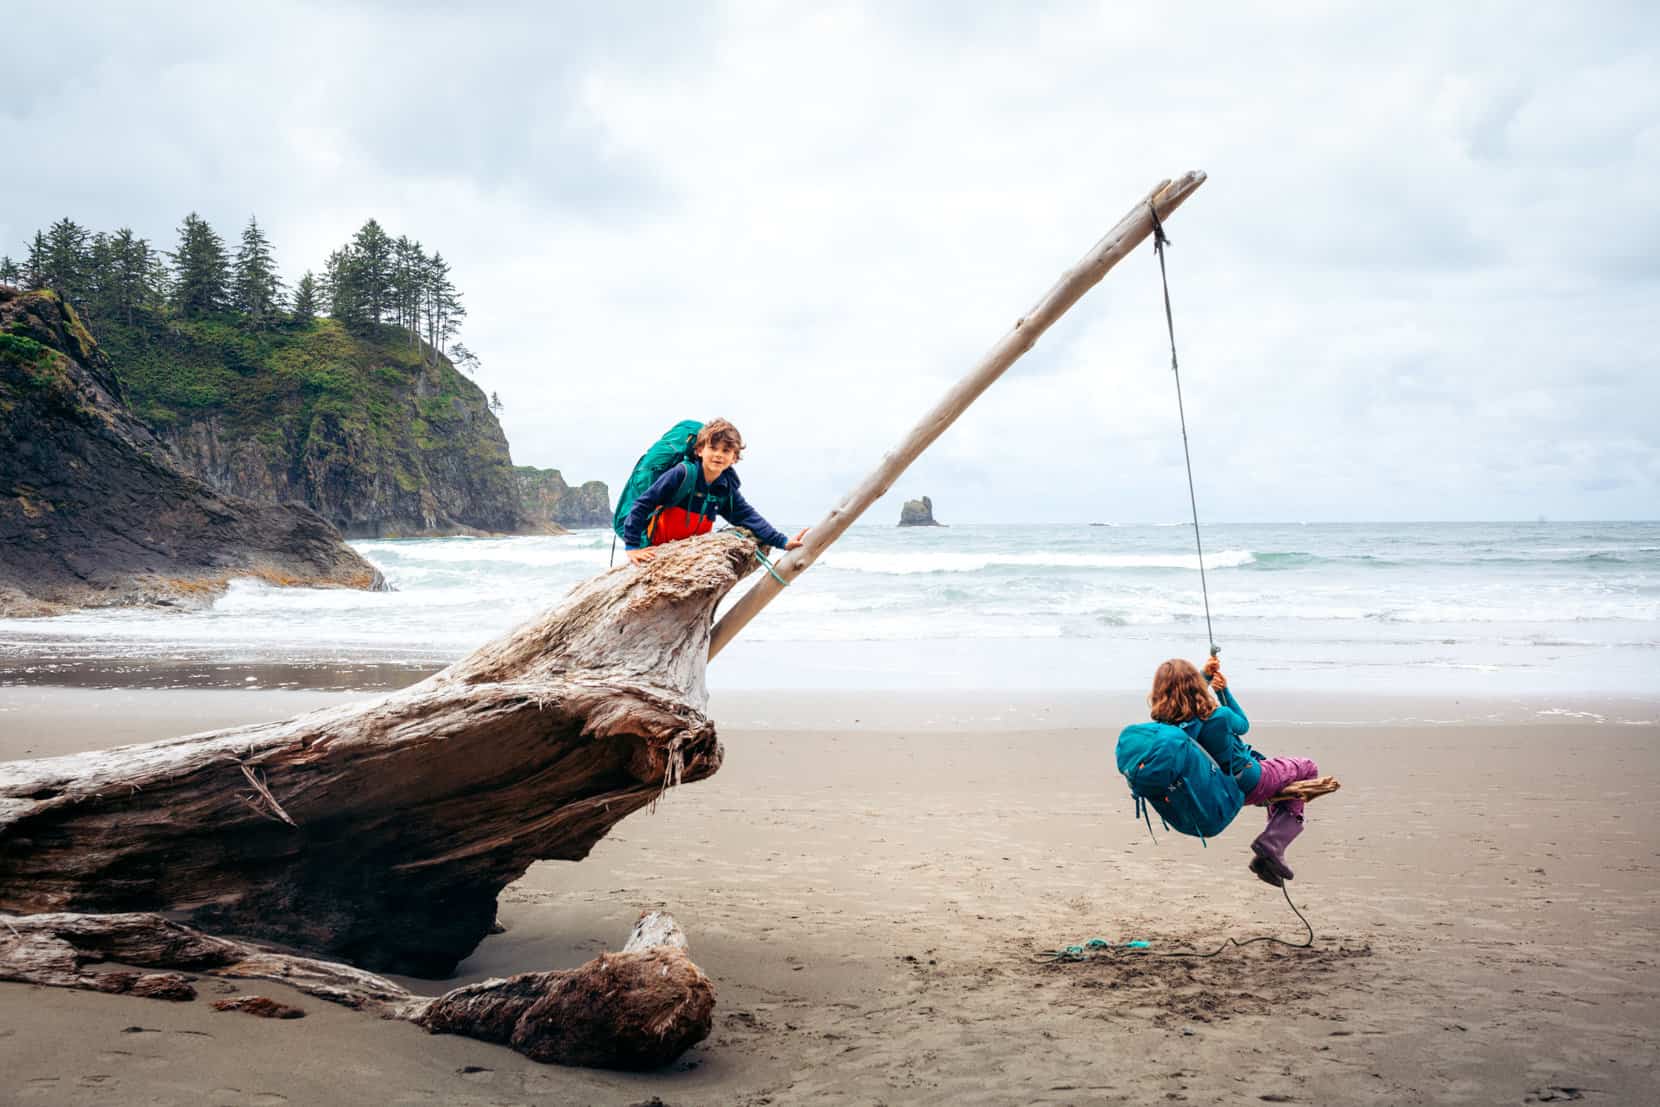 Backpacking on the beach with kids